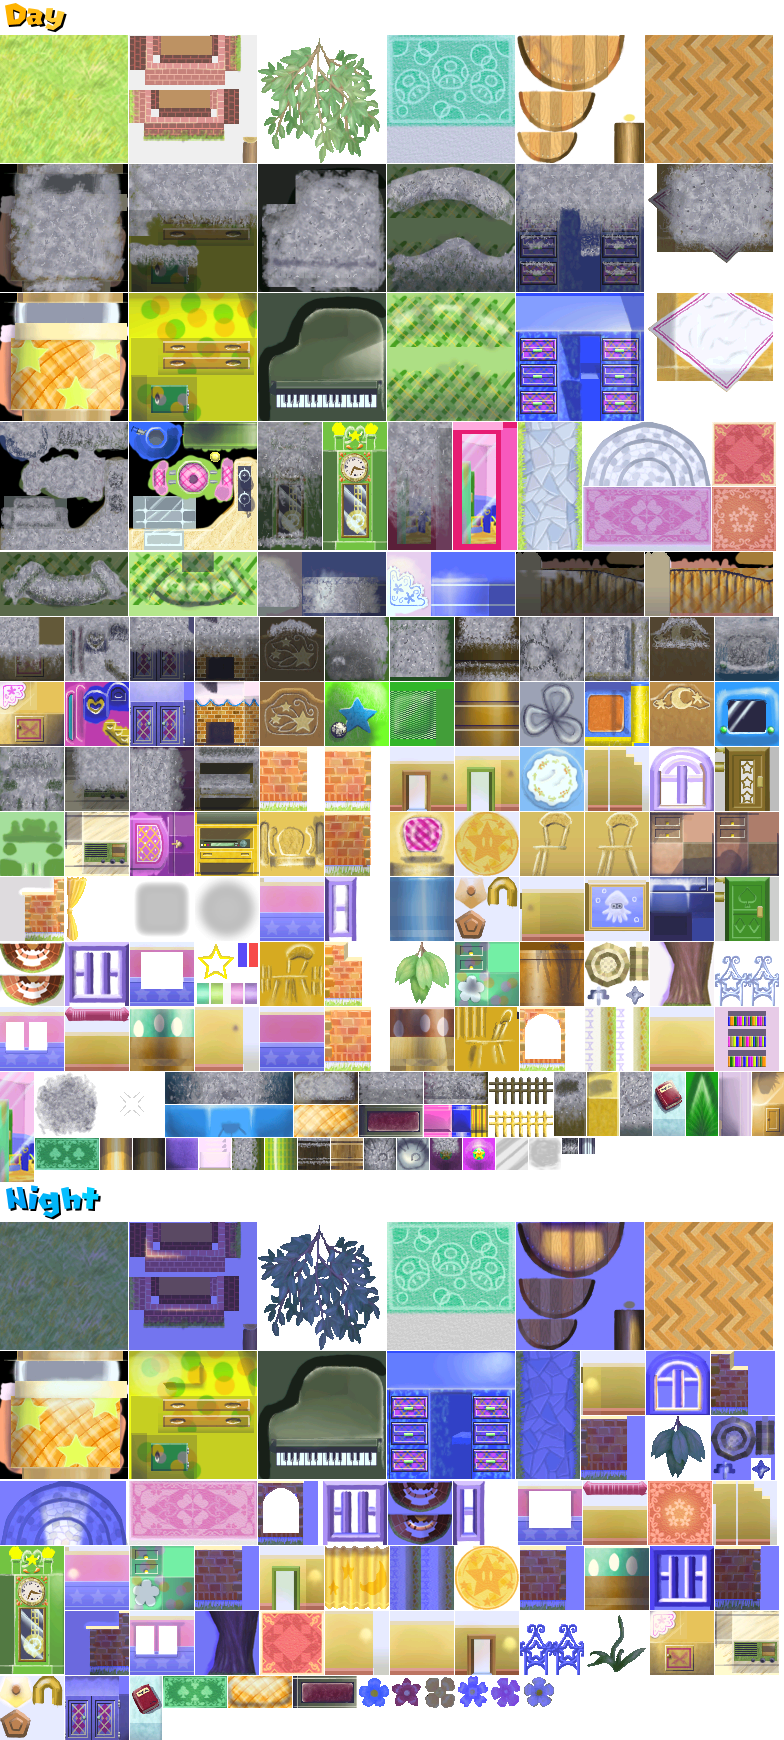 GameCube - Mario Party 6 - Dust 'til Dawn - The Textures Resource